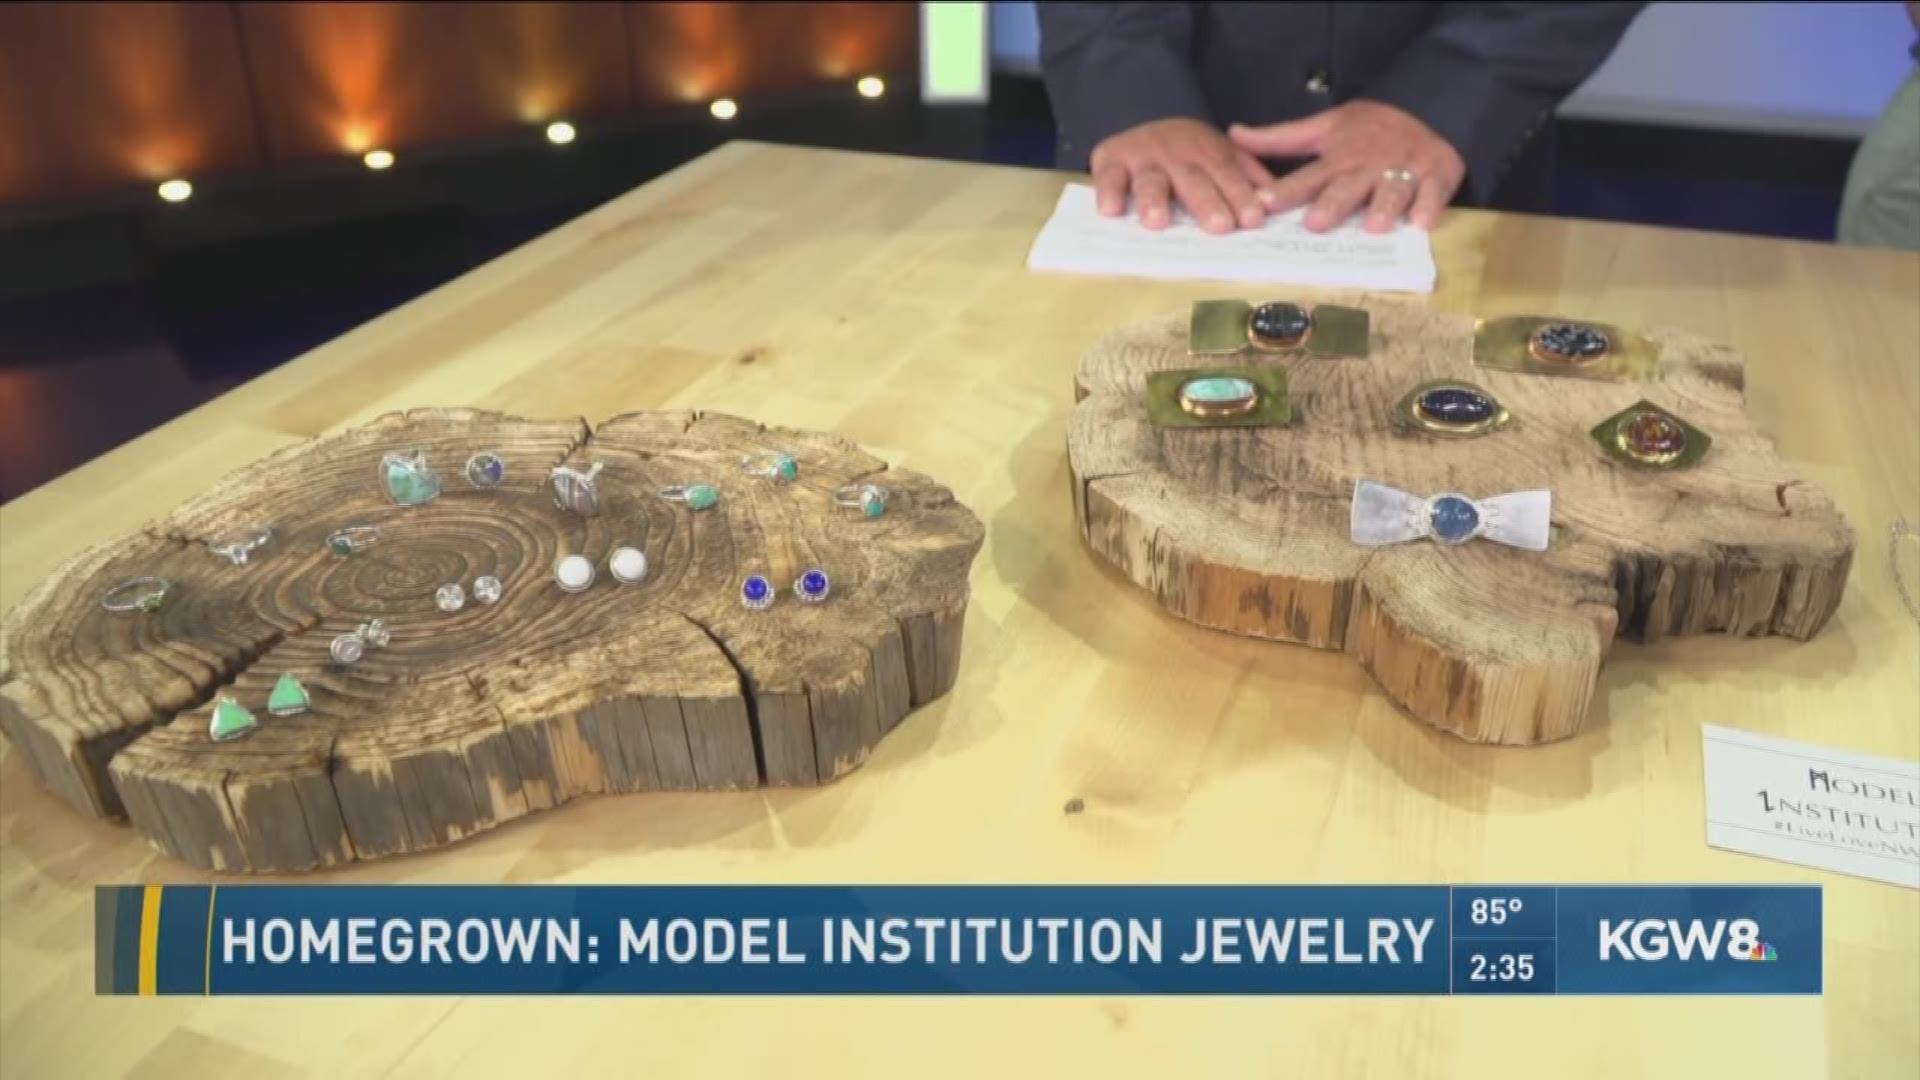 Homegrown: Model Institution Jewelry